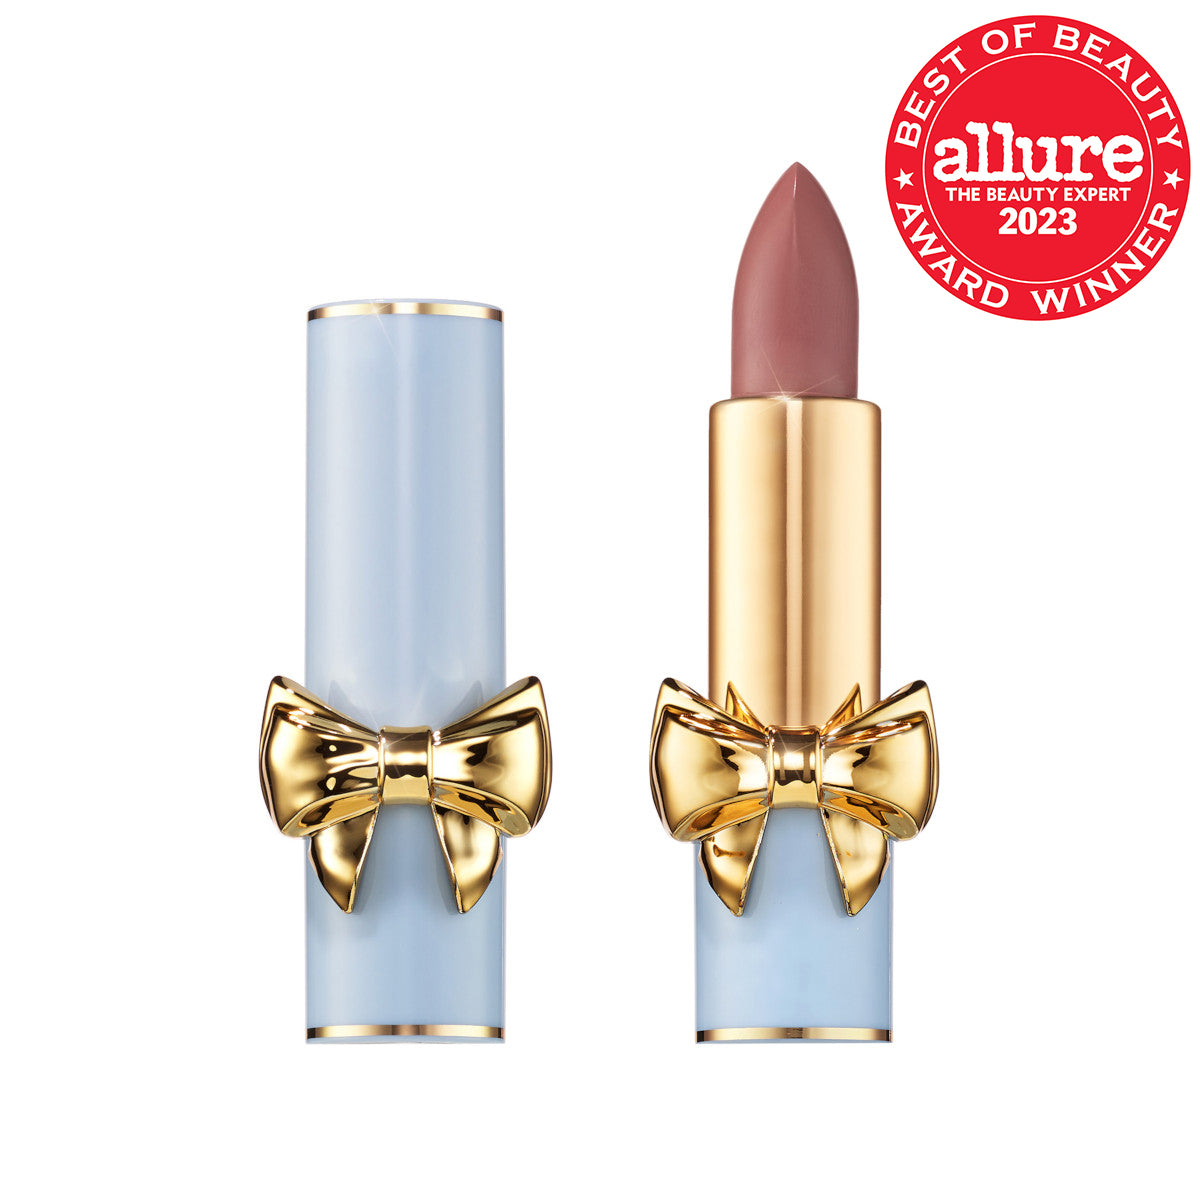 15 Best Nude Lipsticks for Your Skin Tone 2022, According to